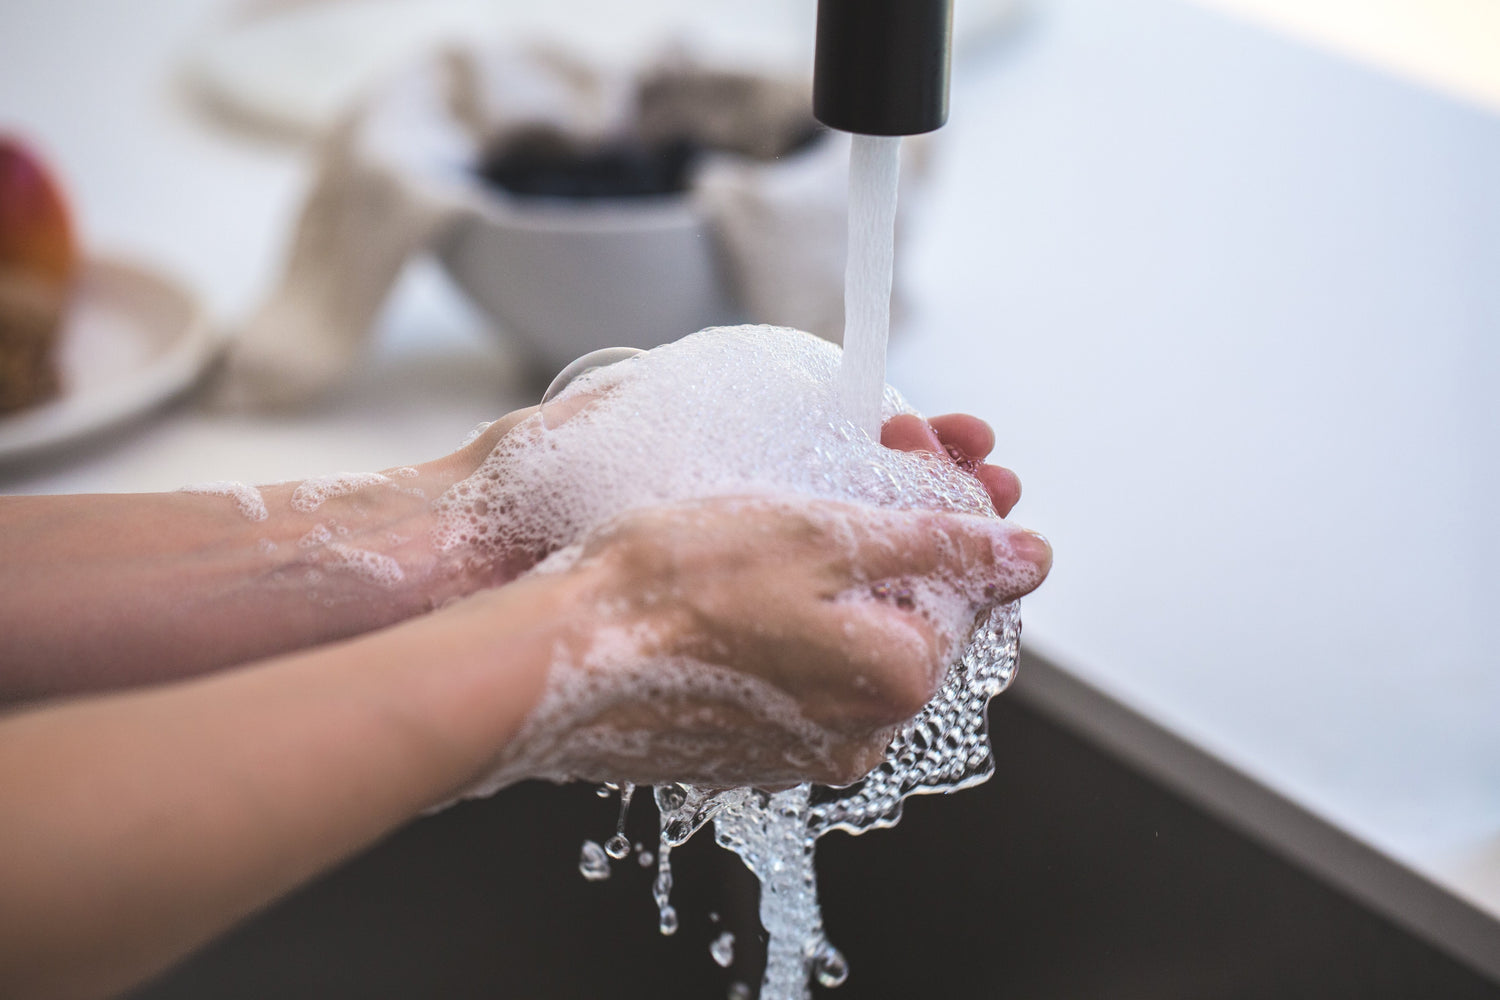 What you need to know about handwashing